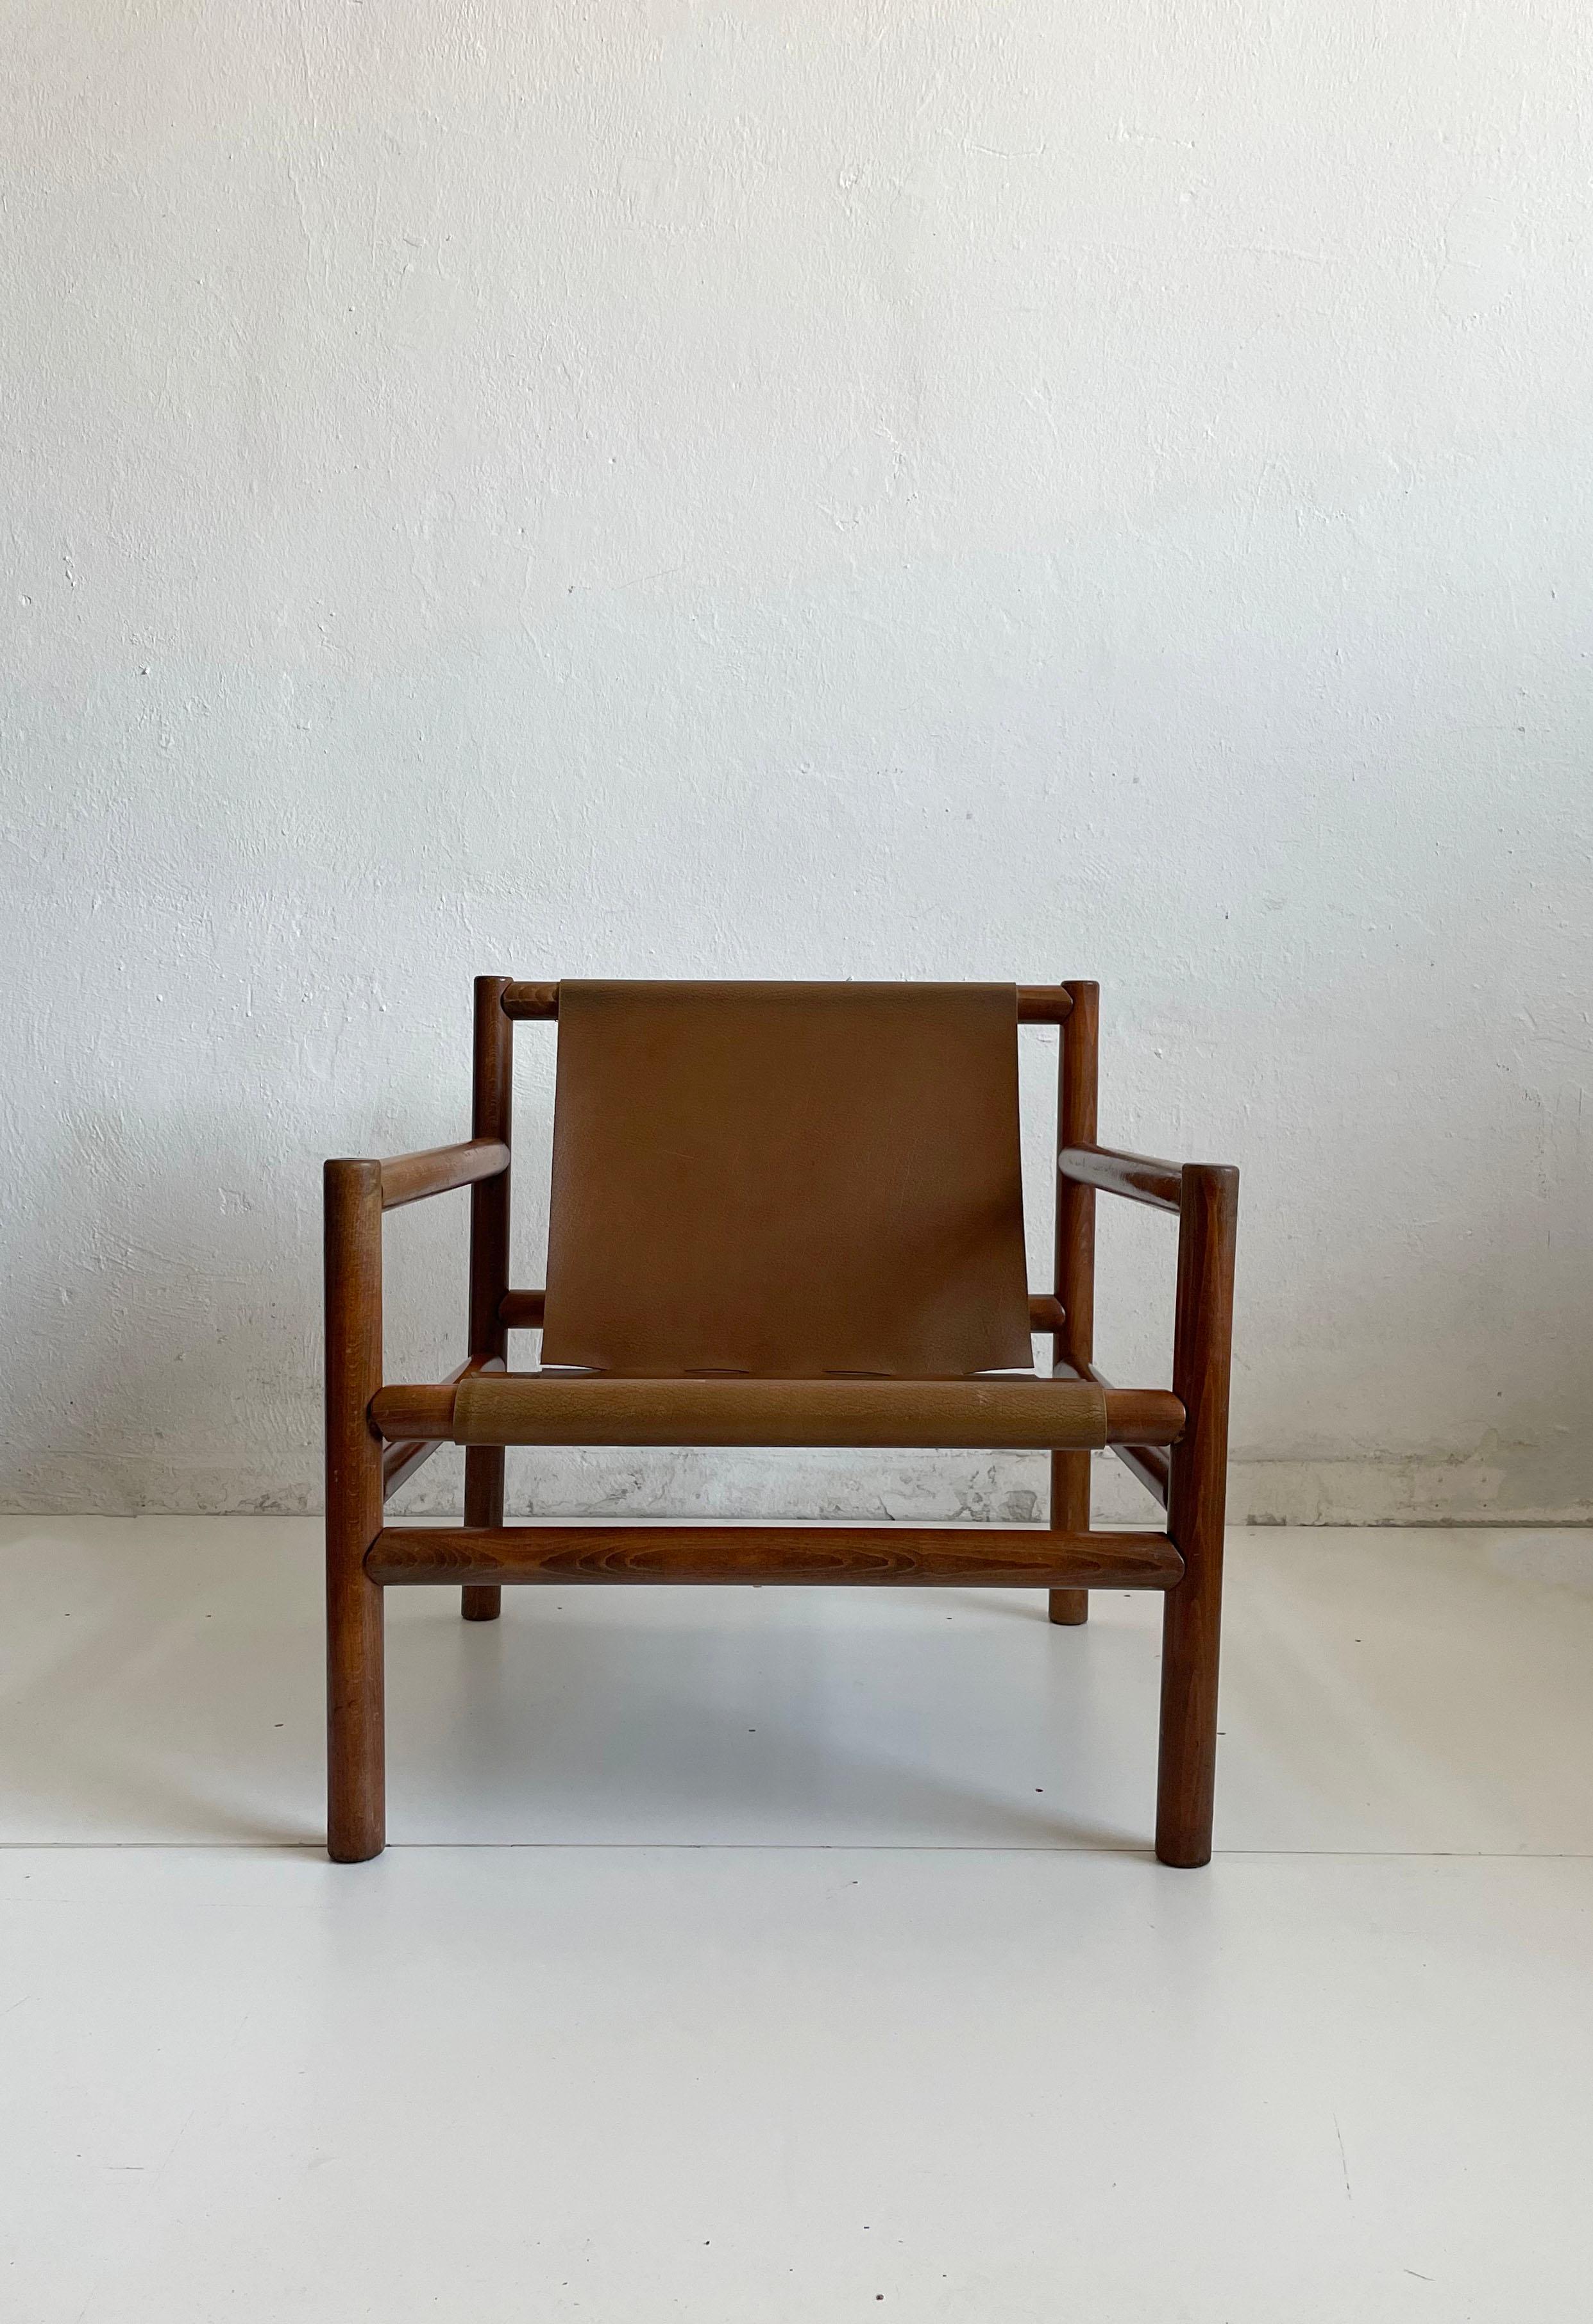 Mid-Century Modern armchair designed by Branko Ursic and manufactured by Stol Kamnik, Slovenia 1970s

The chair features a modernist wooden frame and a Minimalist caramel brown faux leather seat

The structure is sound and sturdy, wooden parts